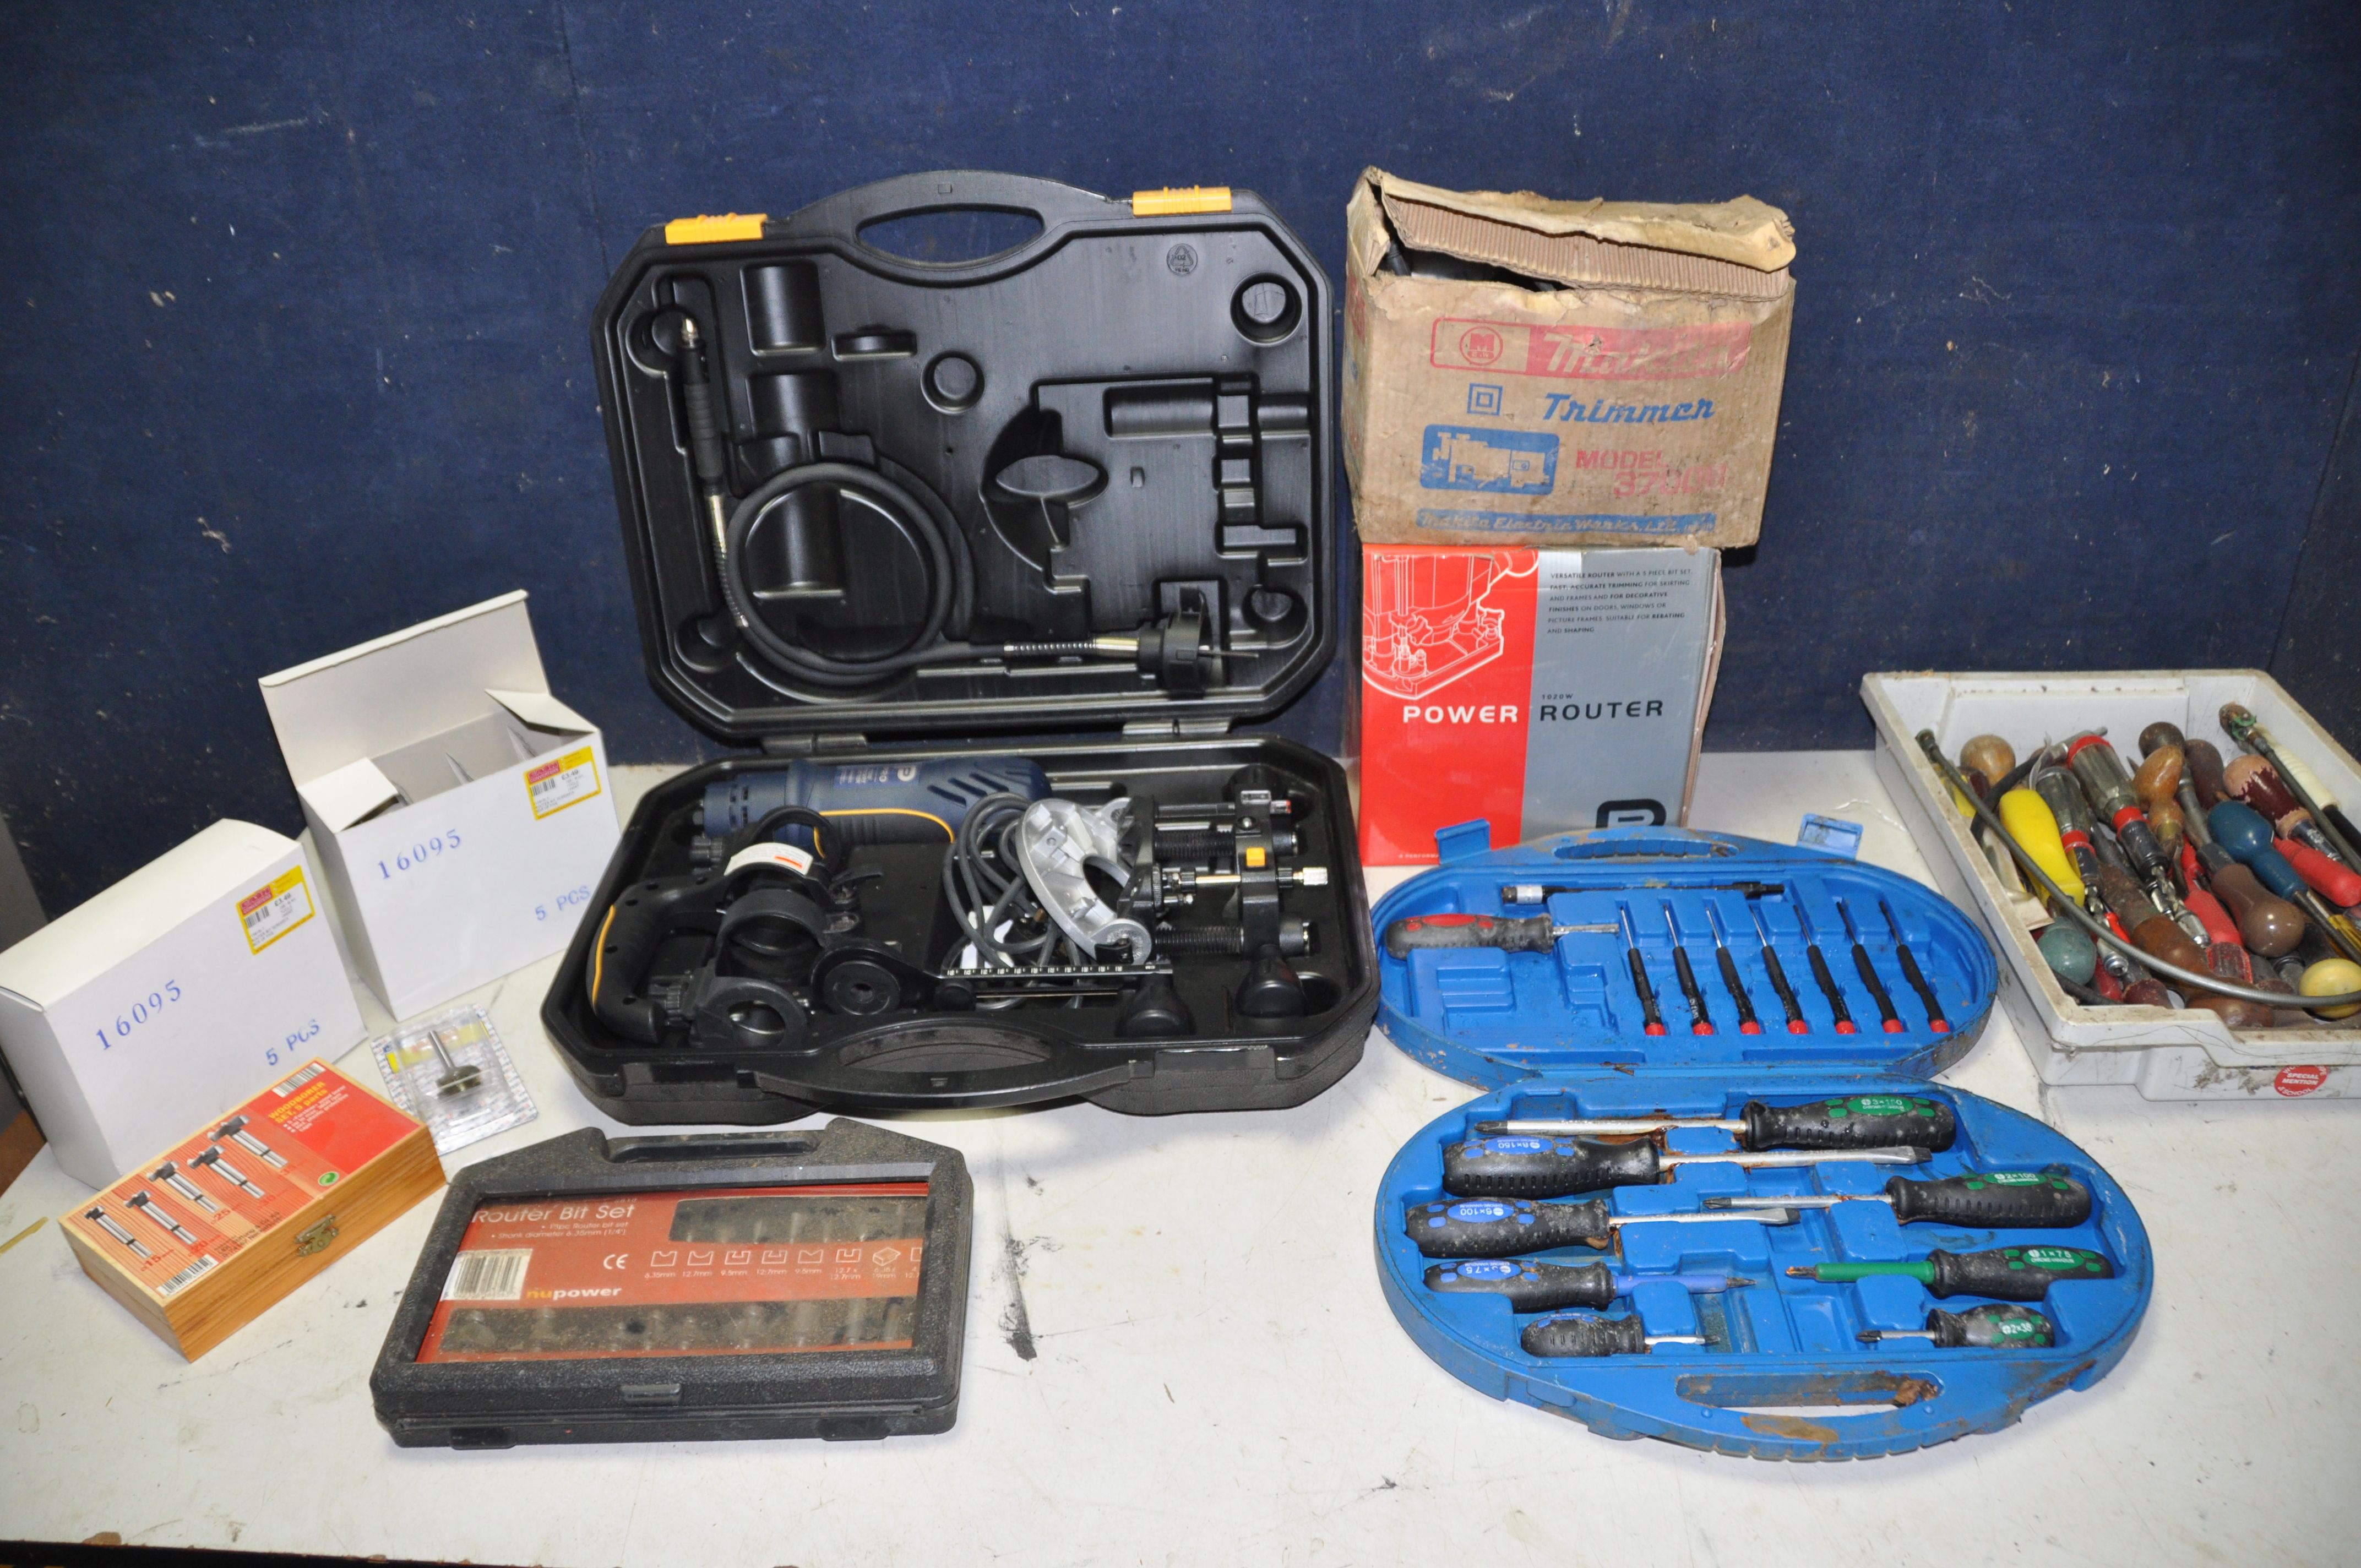 A PERFORMANCE POWER PRO CLM700RTC ROTARY CUTTER in original case with accessories along with a